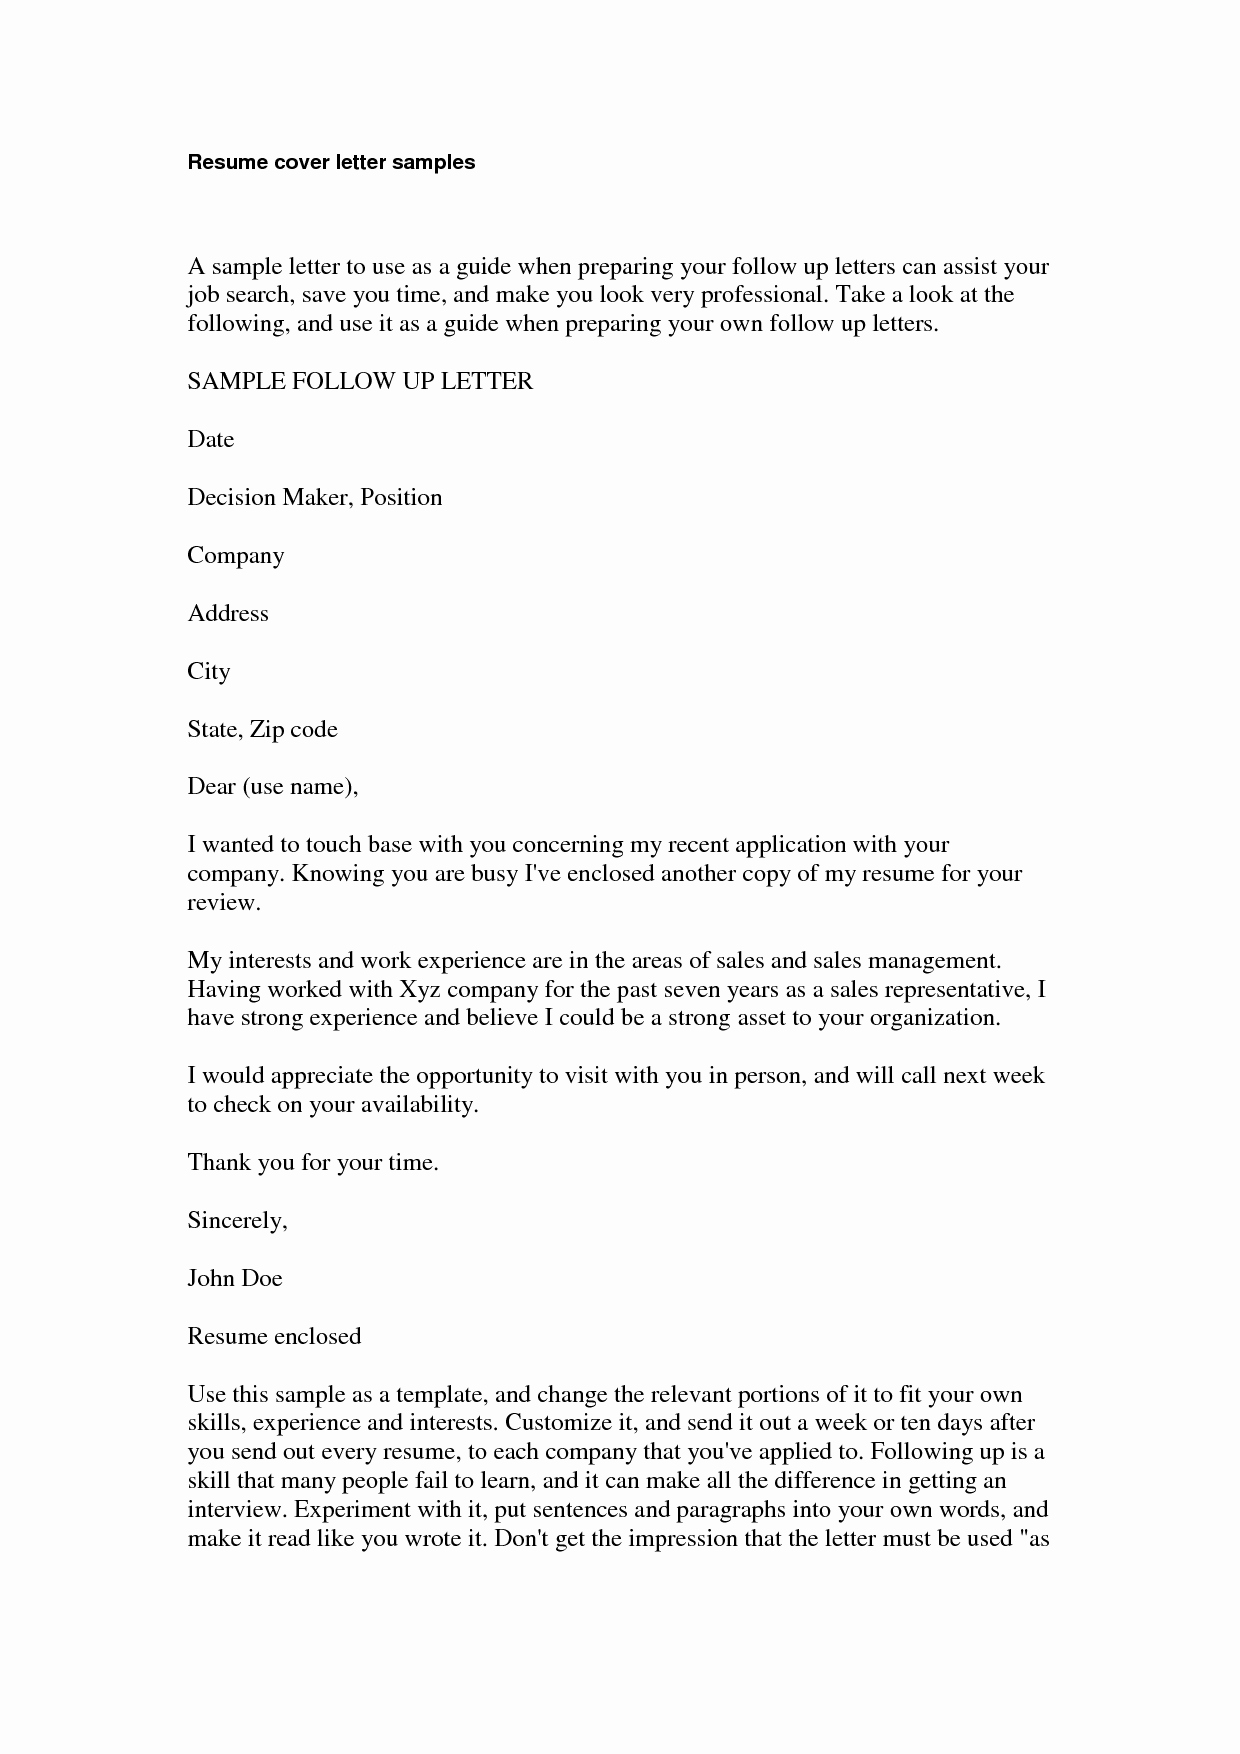 Free Resume Cover Letter Samples Luxury Best S Of Professional Resume Cover Letter Template